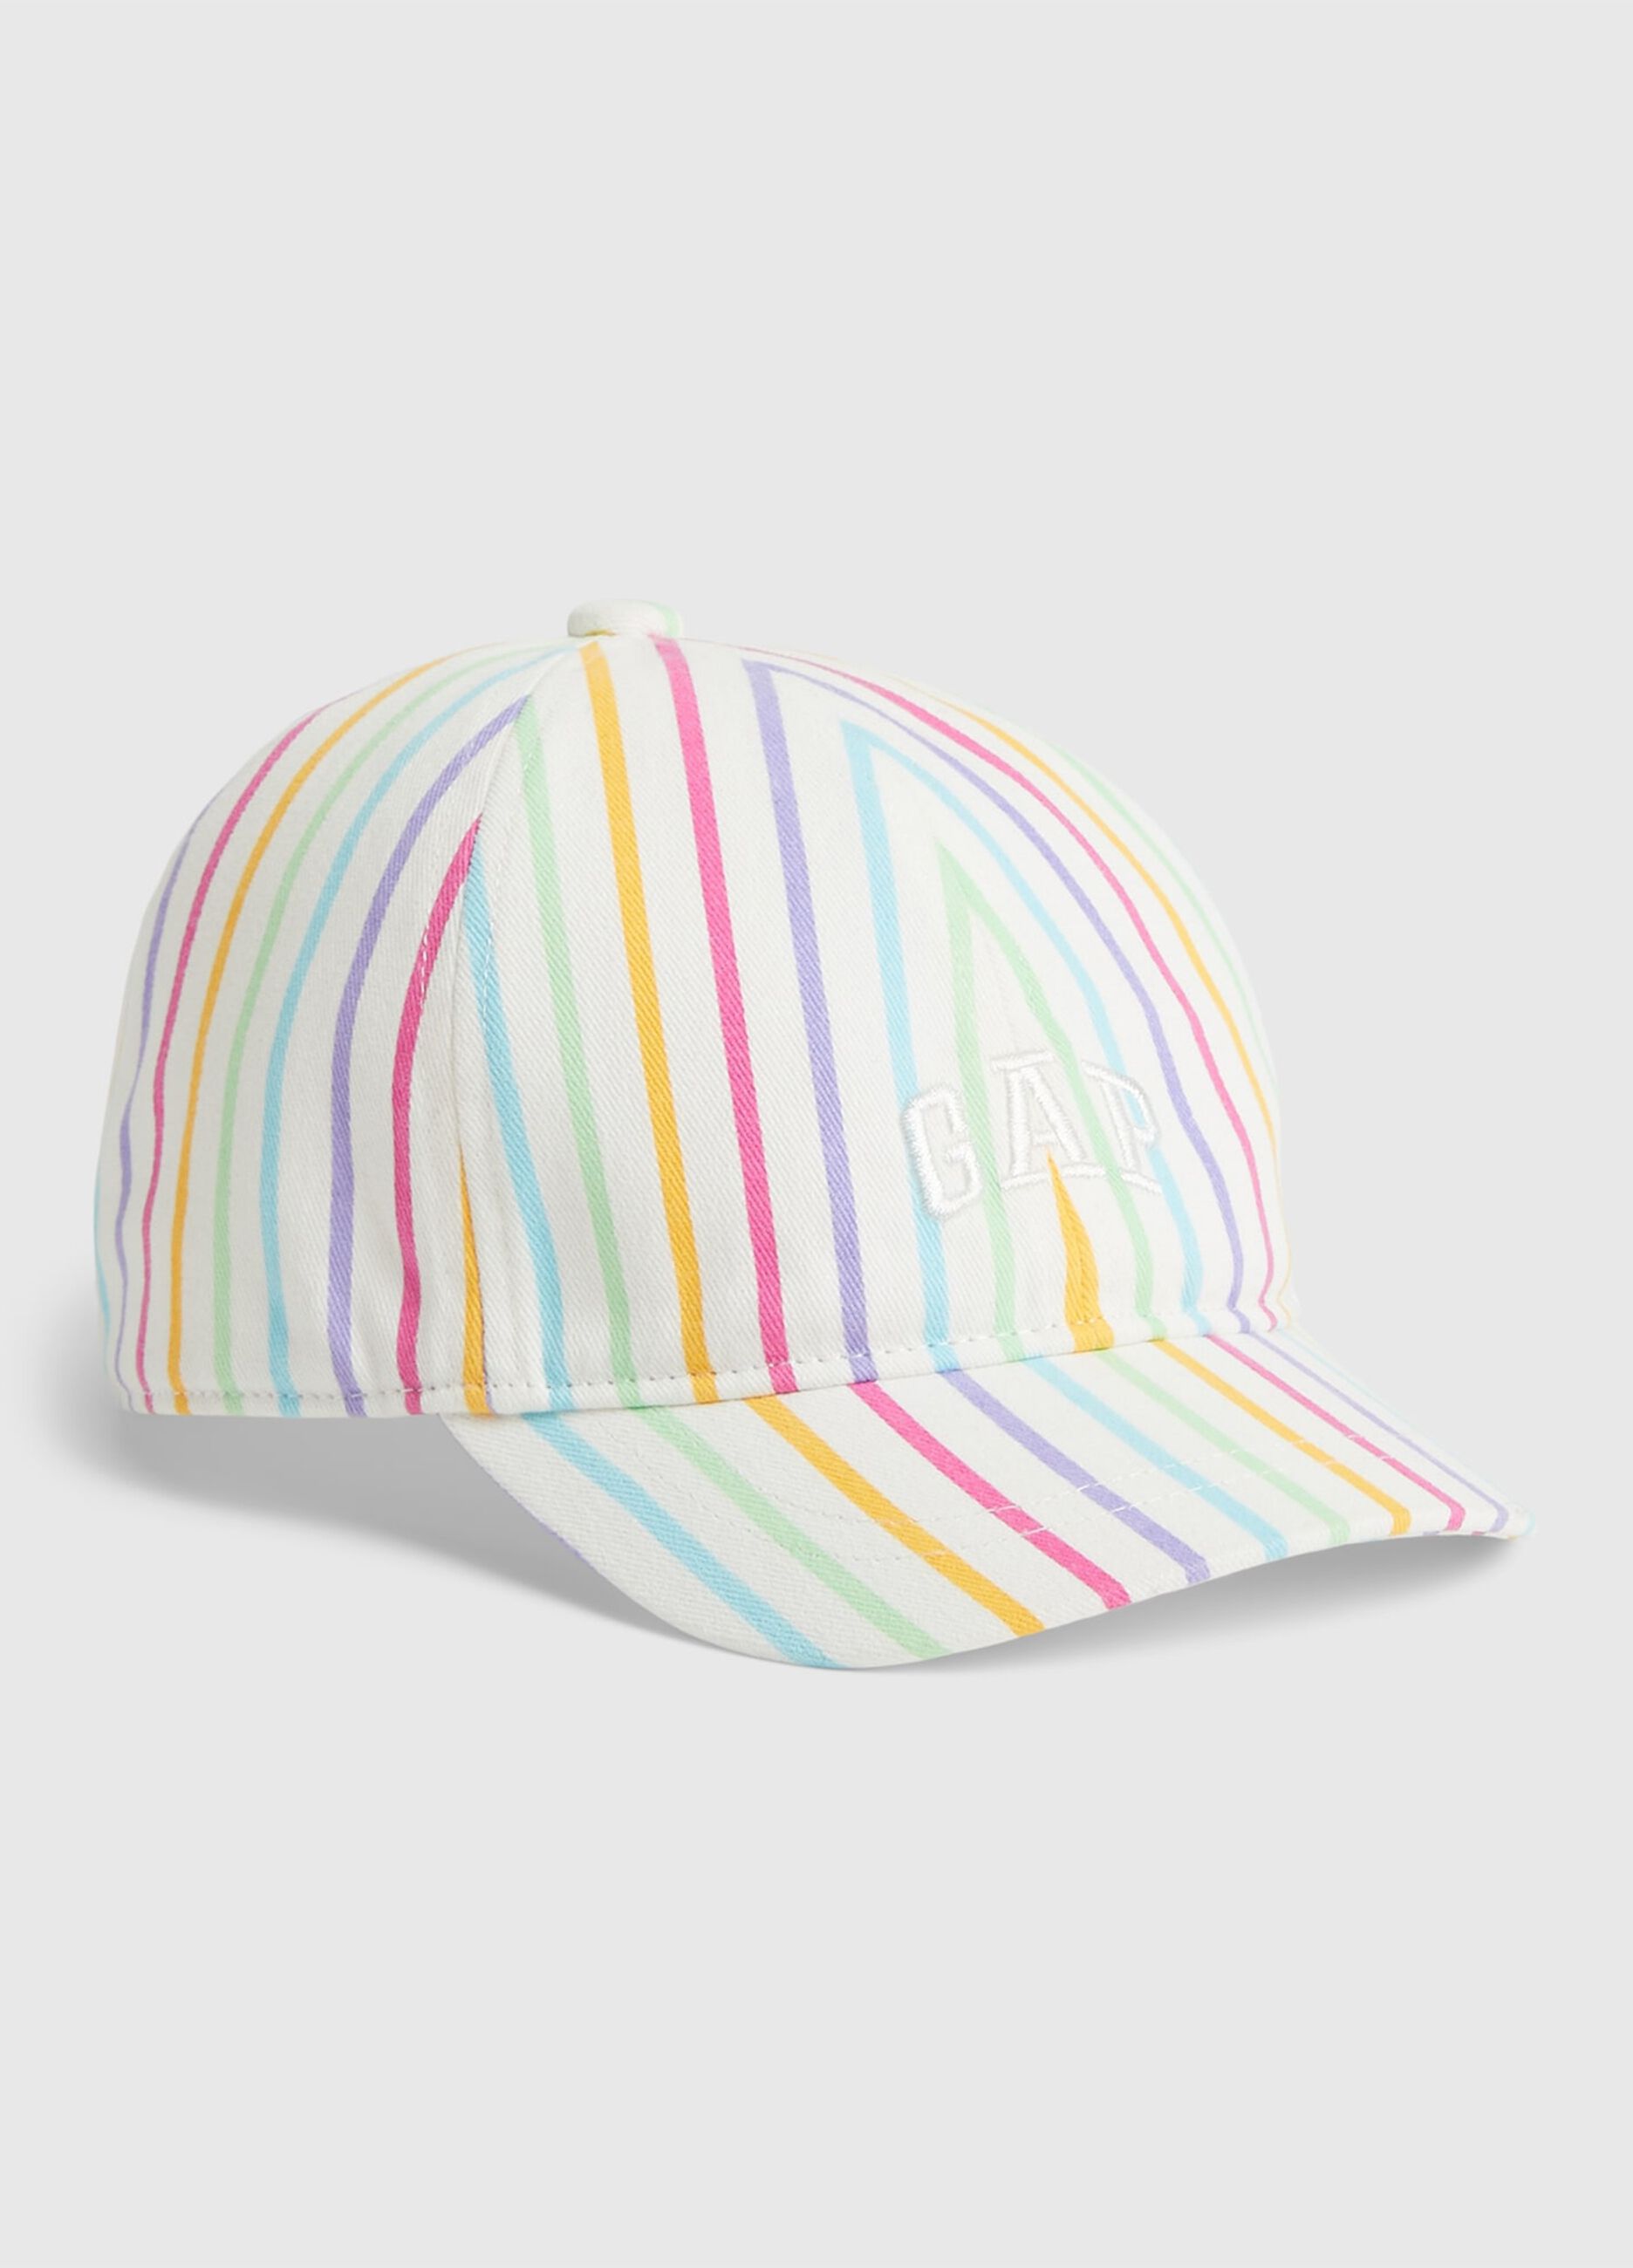 Striped baseball cap with embroidered logo.